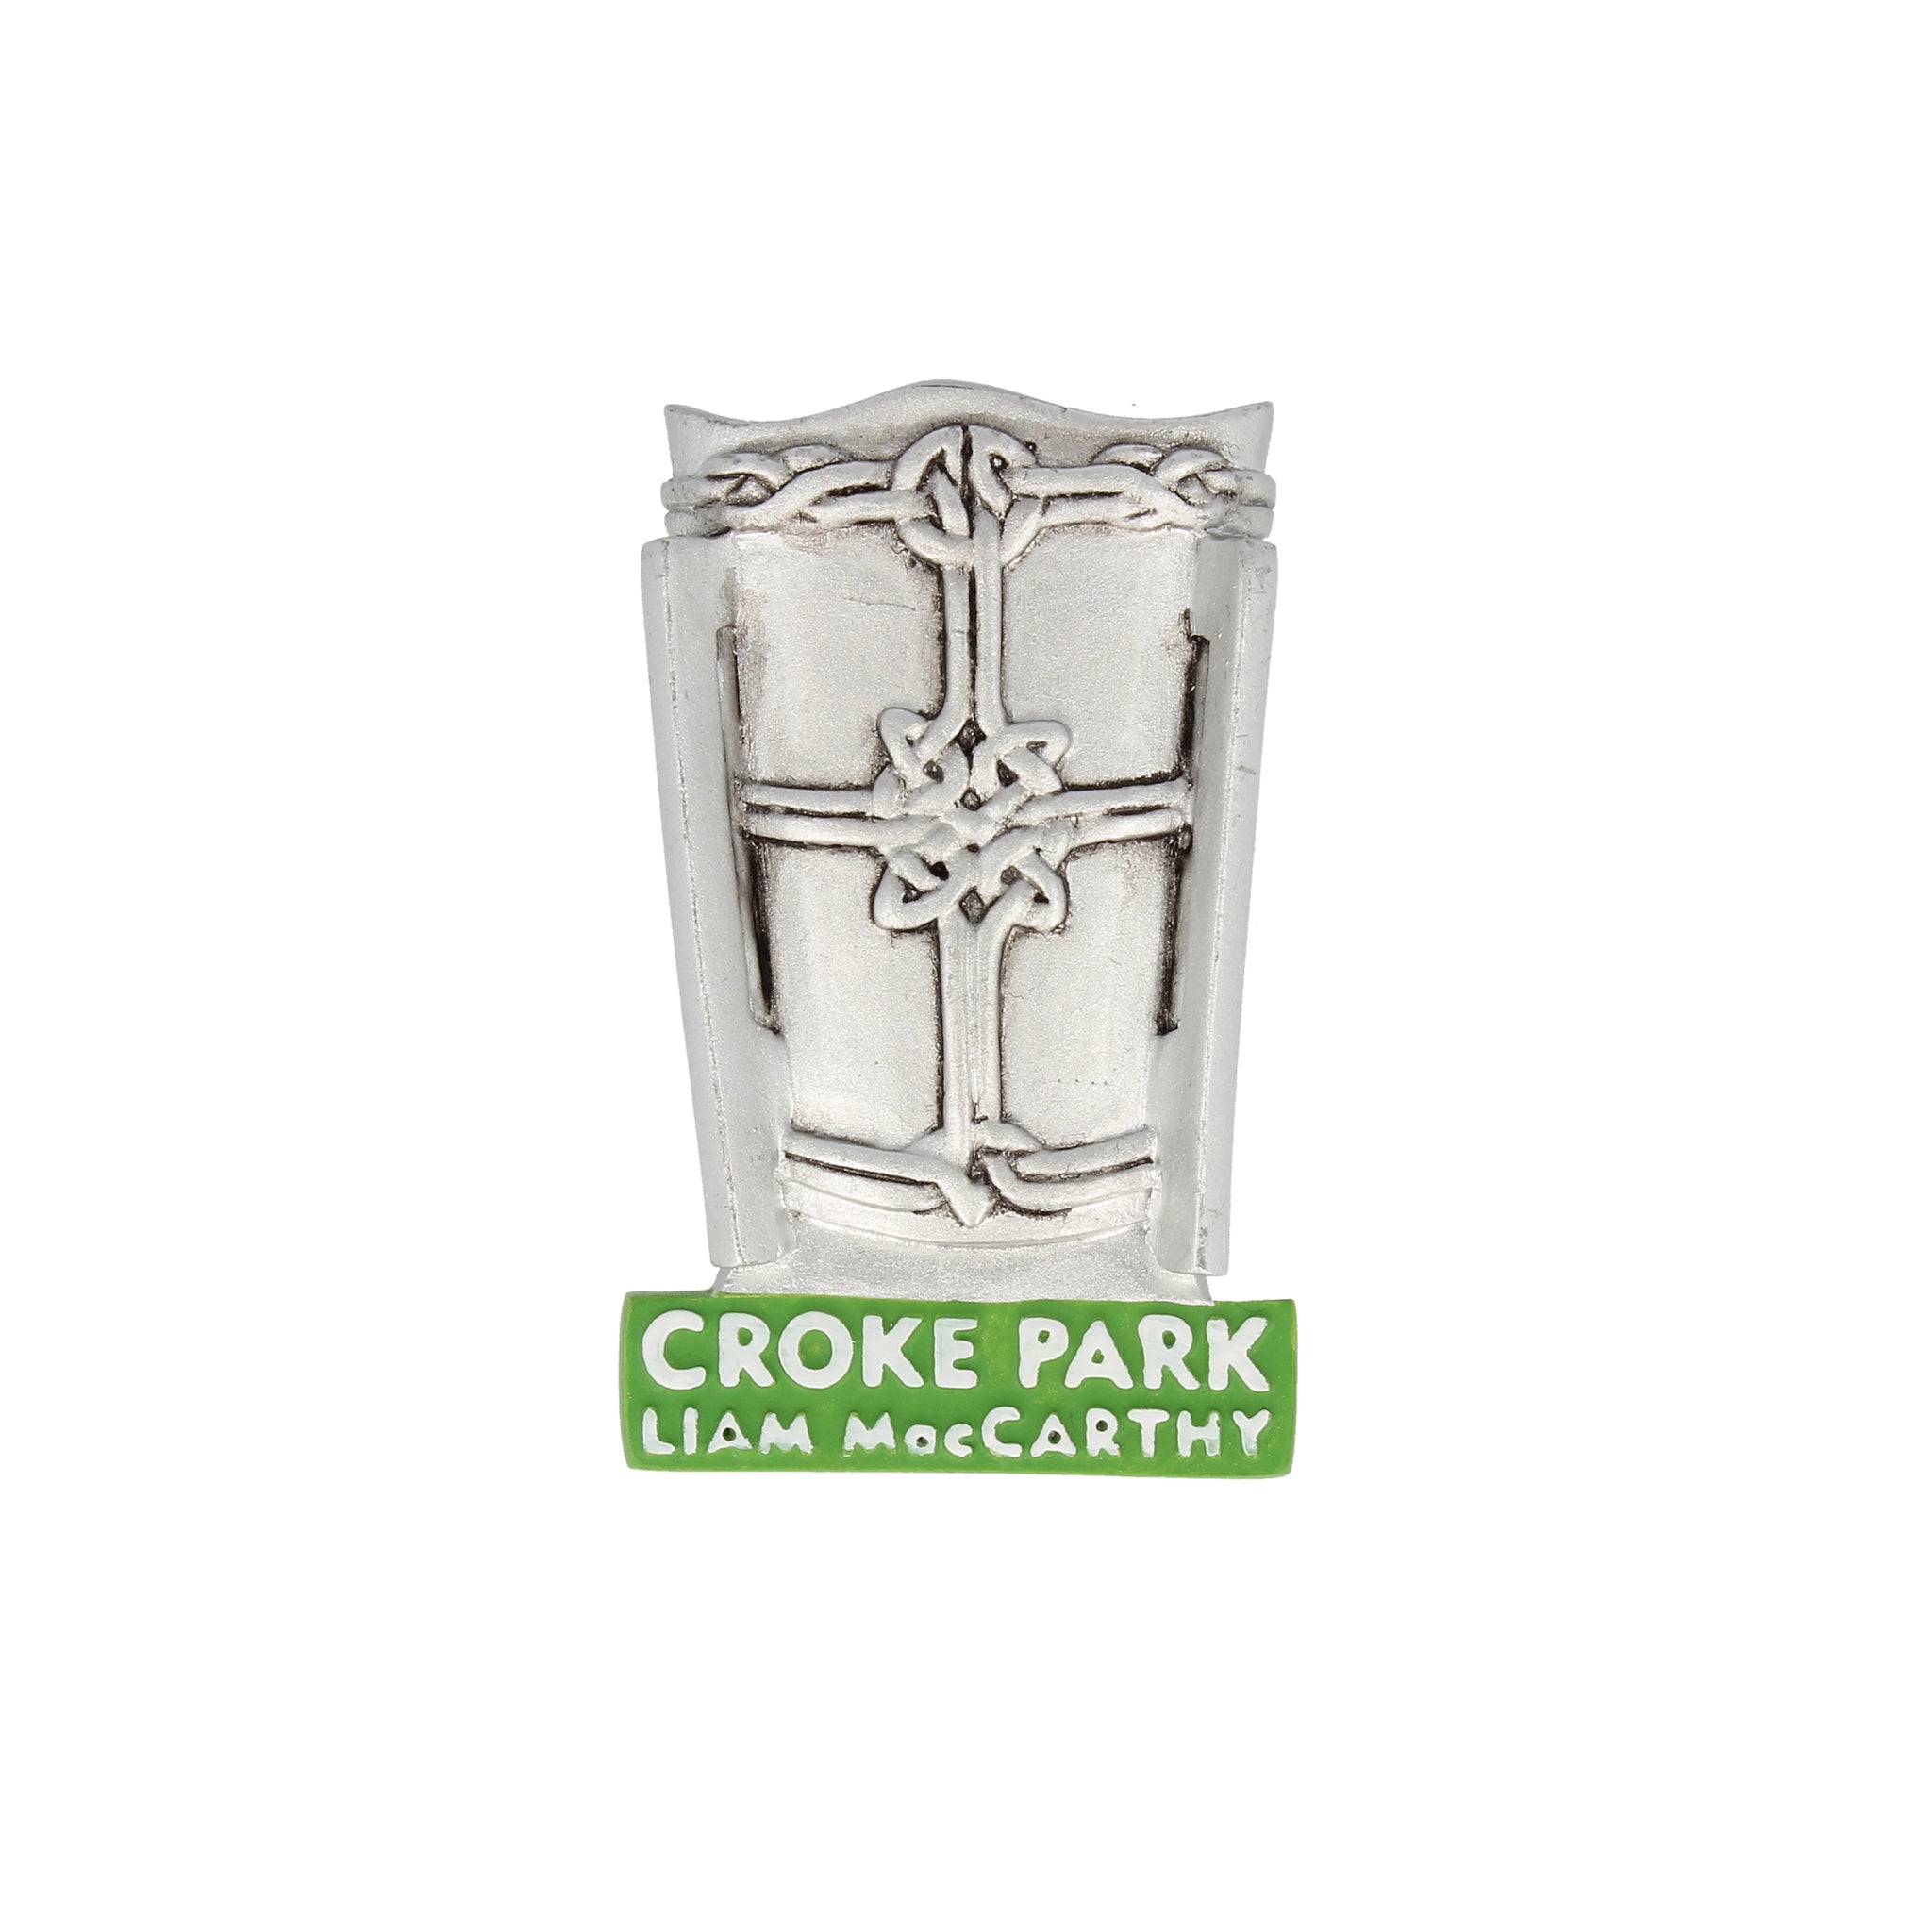 Liam MacCarthy Cup magnet